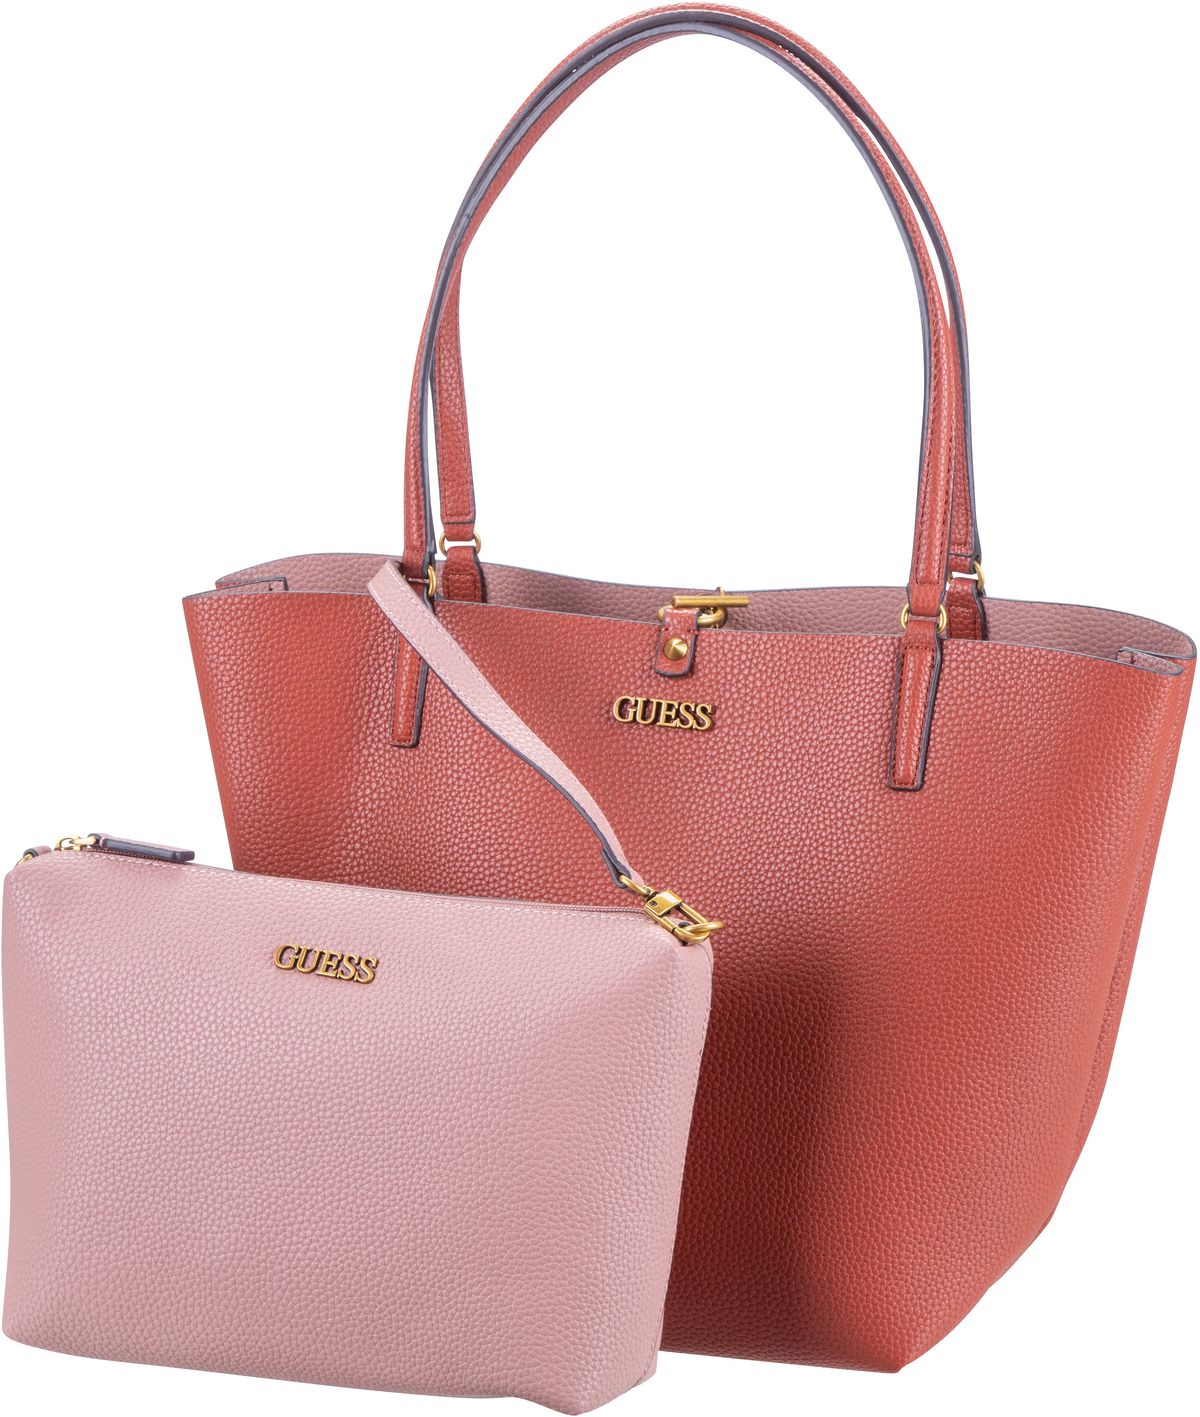 Guess Alby Toggle Tote - Whiskey/Rose